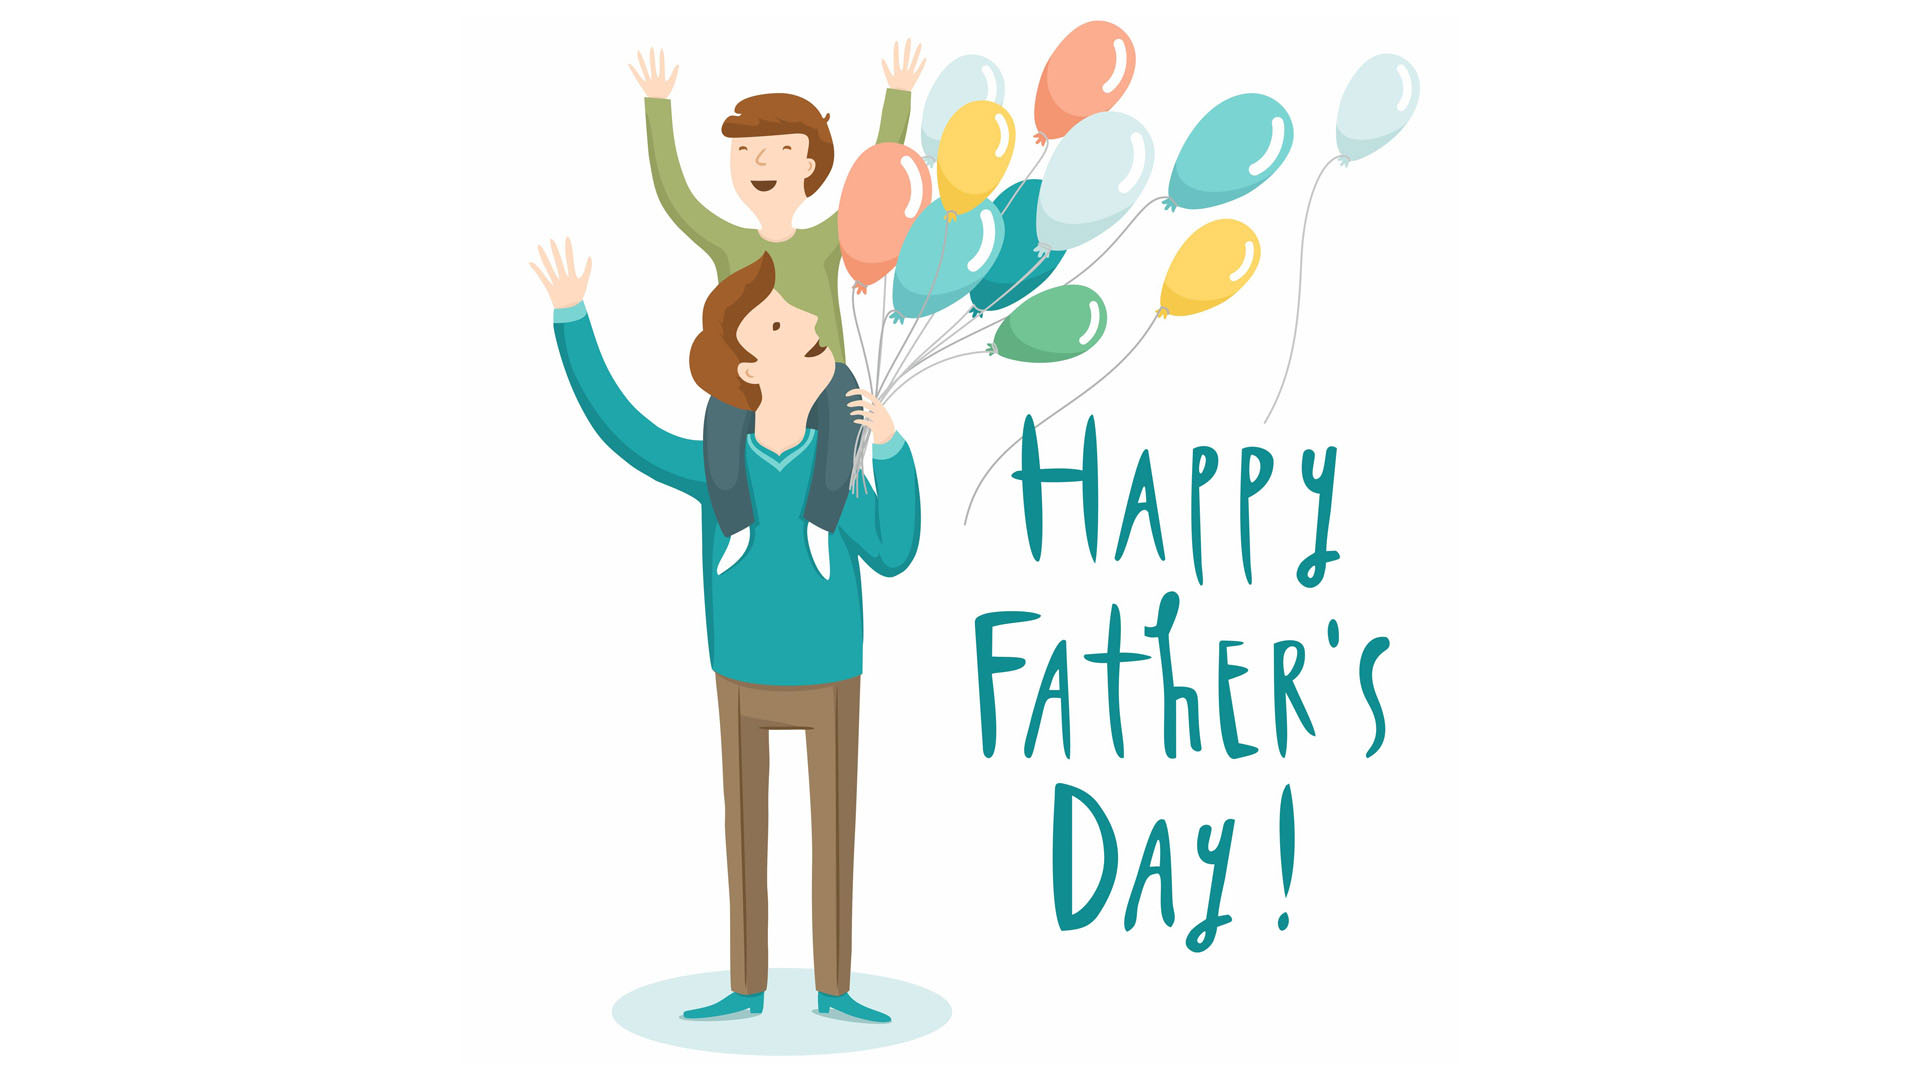 Father's Day Free Hd Wallpapers | Download Free Desktop Wallpaper ...